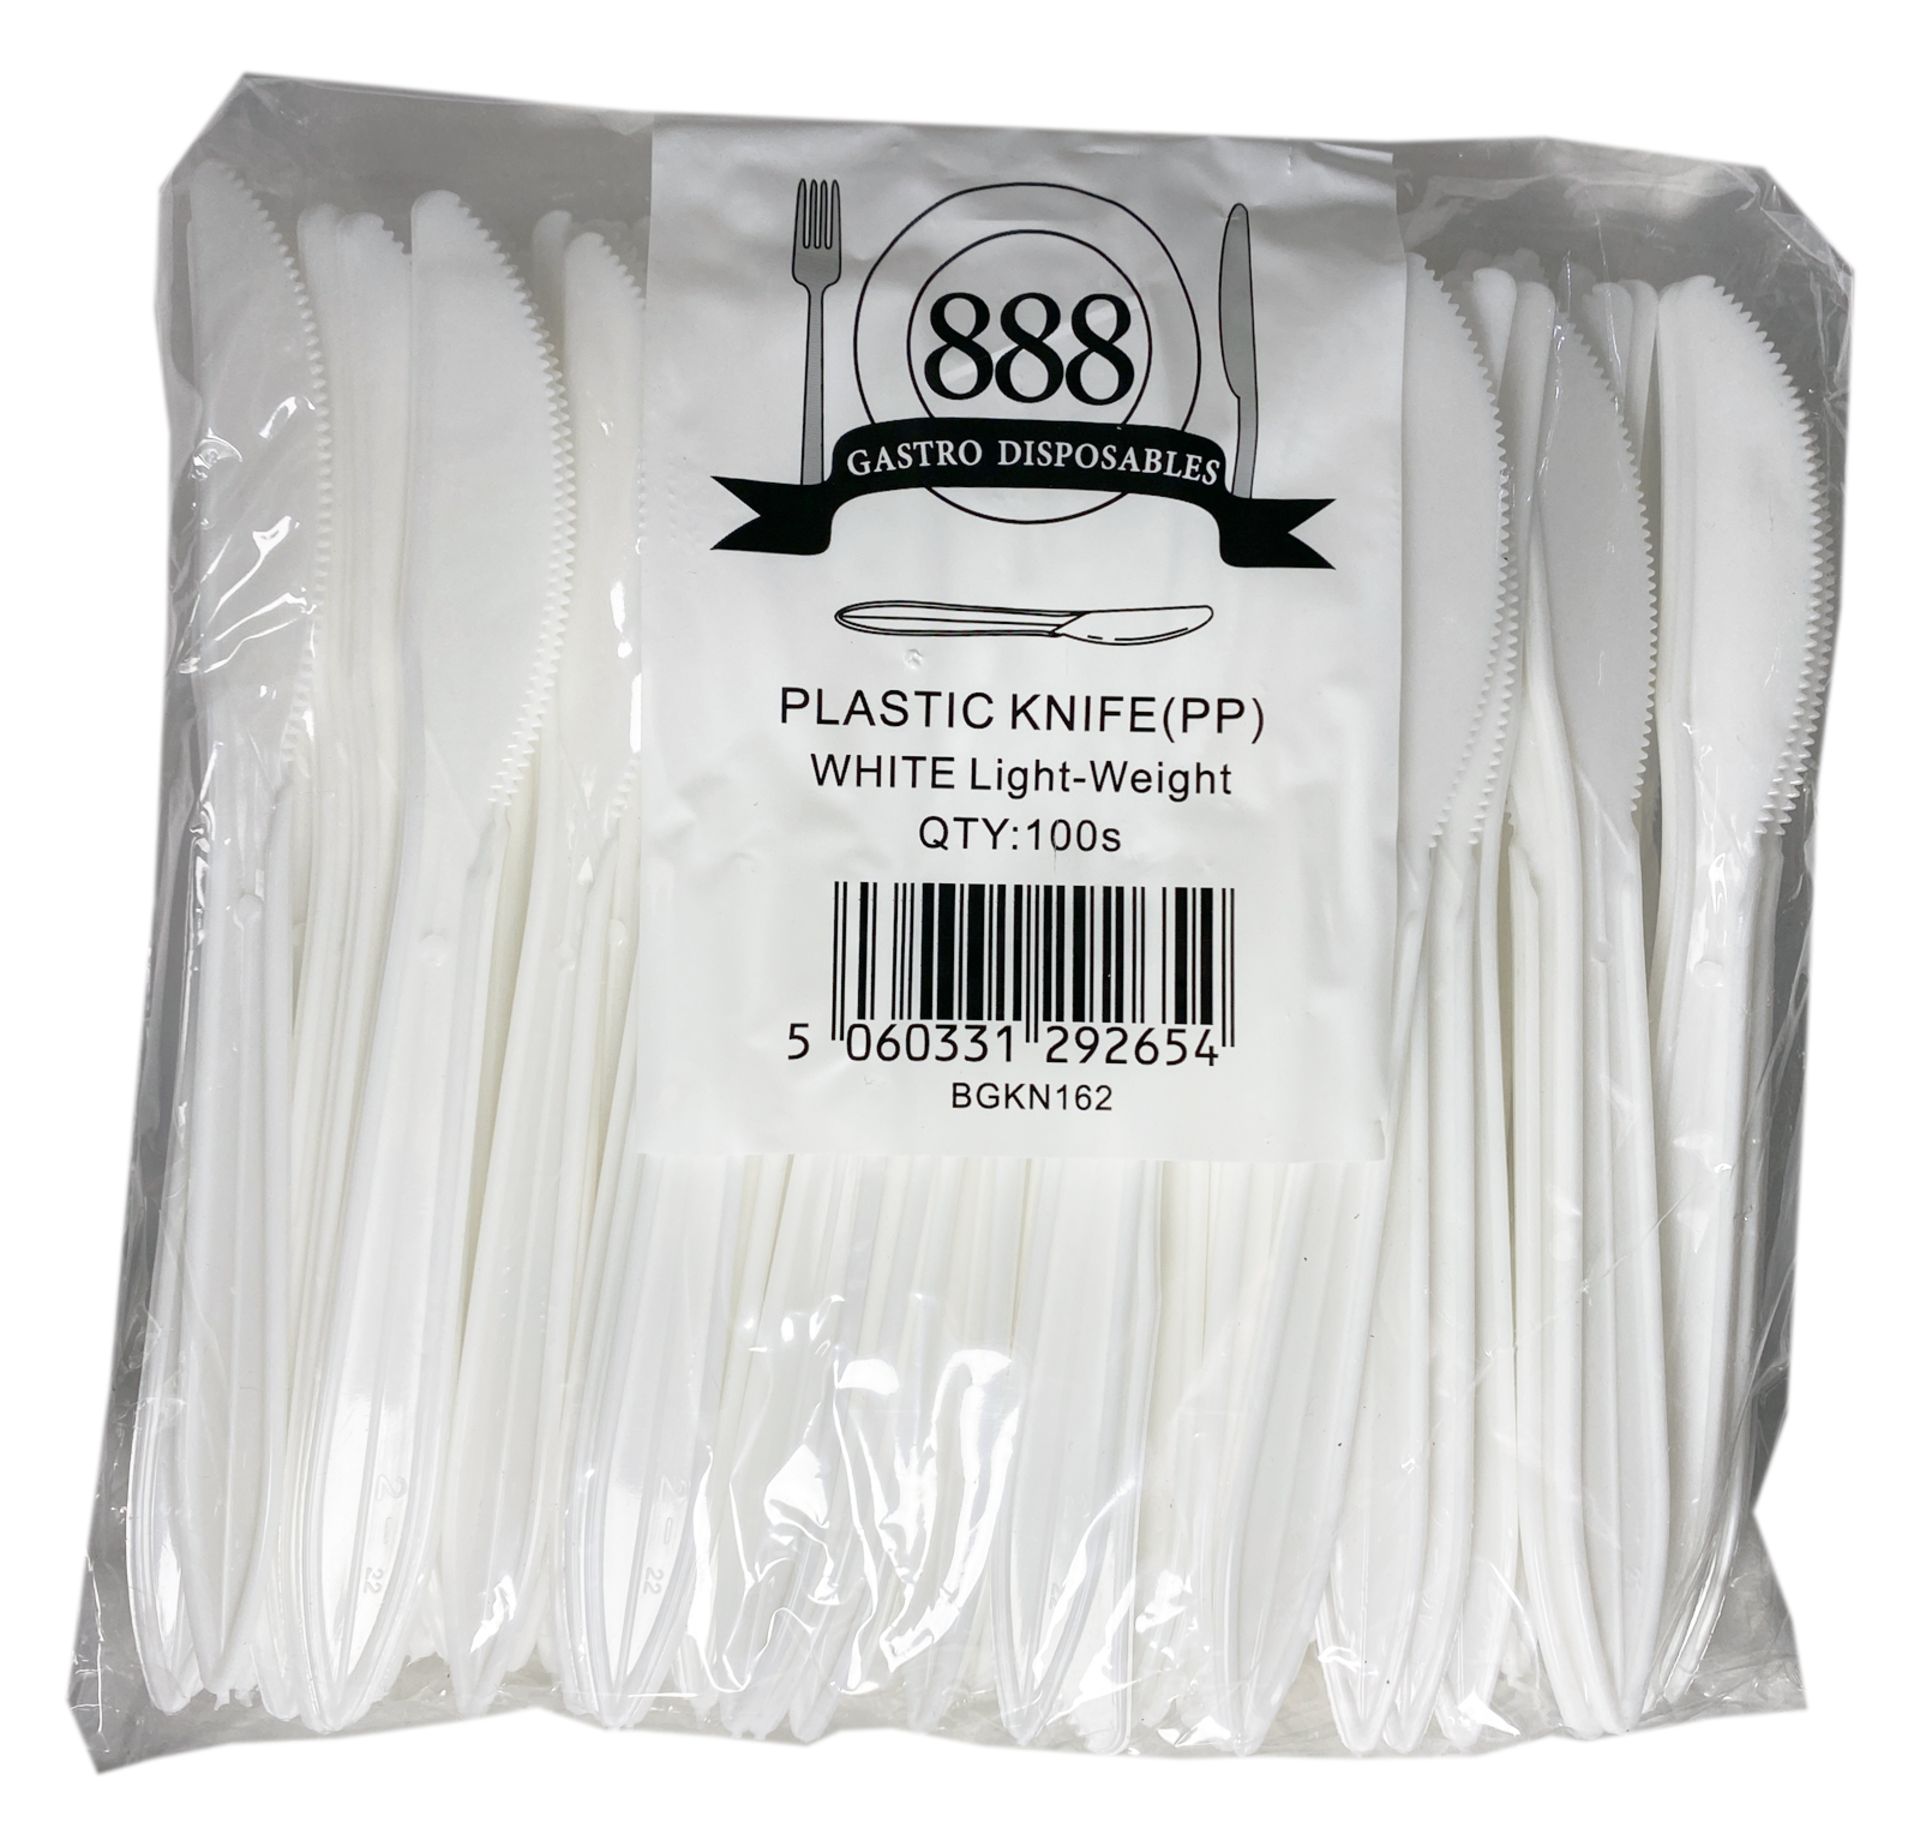 5 x Boxes of 1000 Plastic Knives by 888 Gastro Disposables